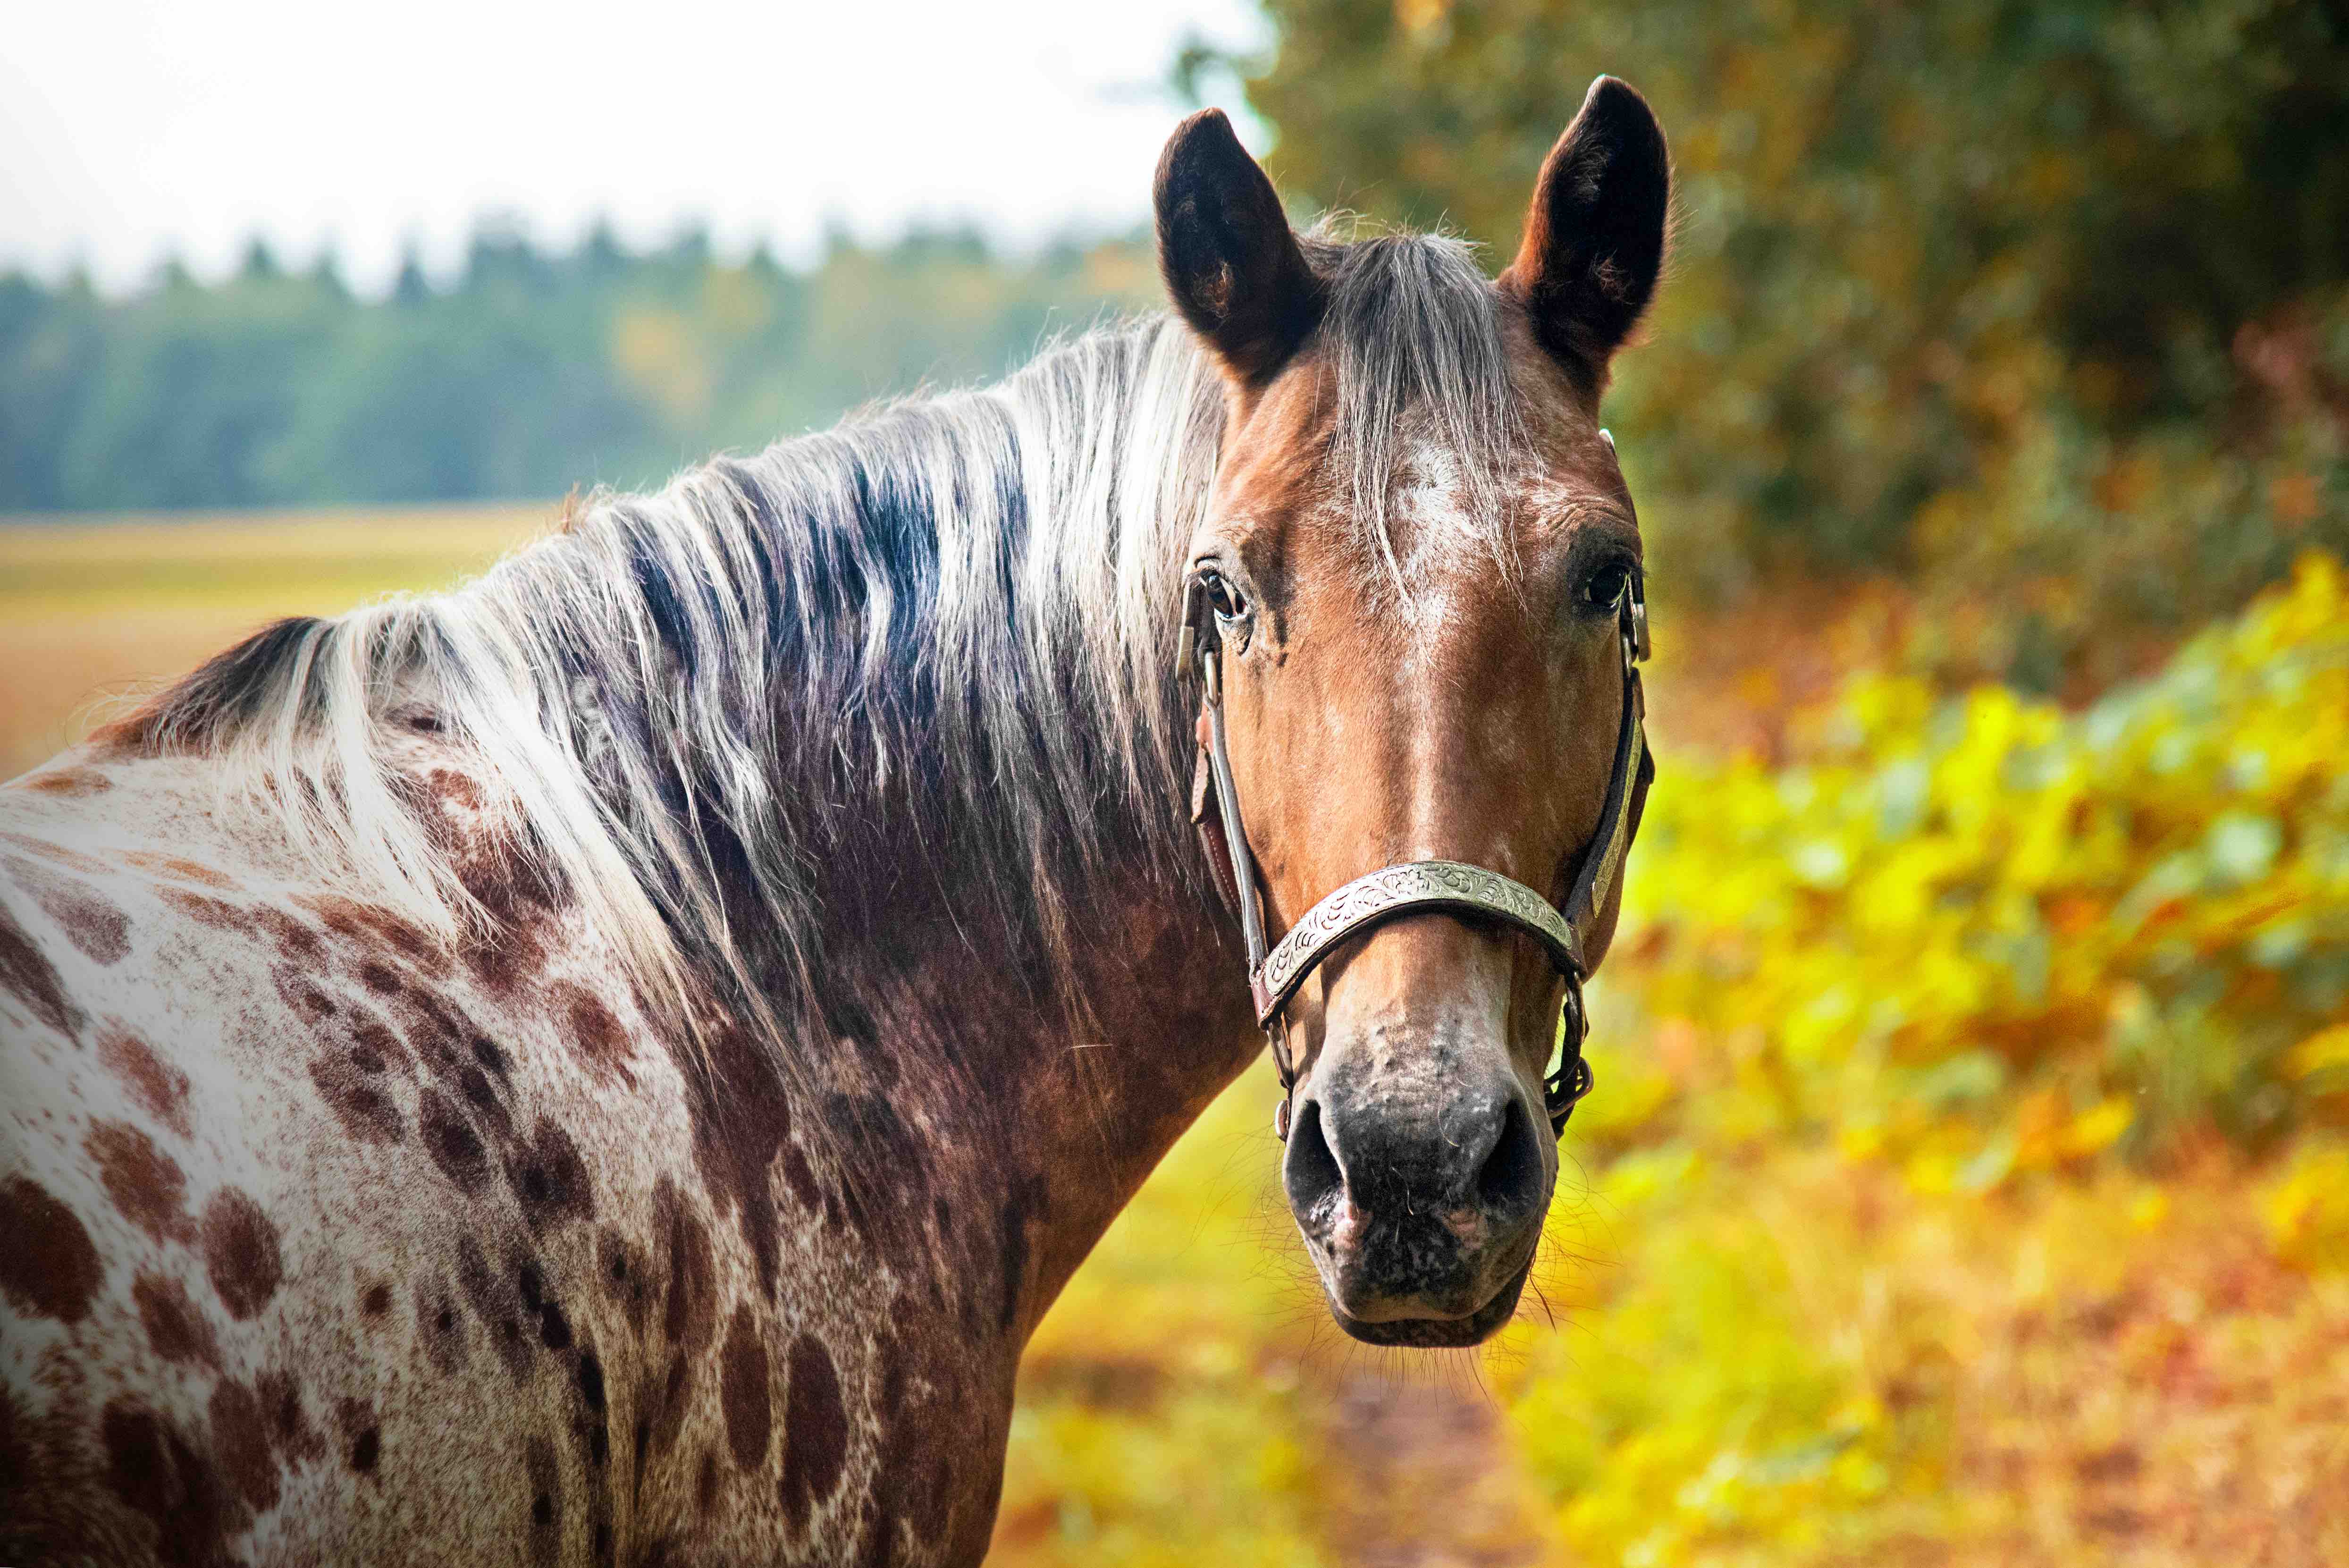 Appaloose Horse  One of the most popular horse breeds in the US